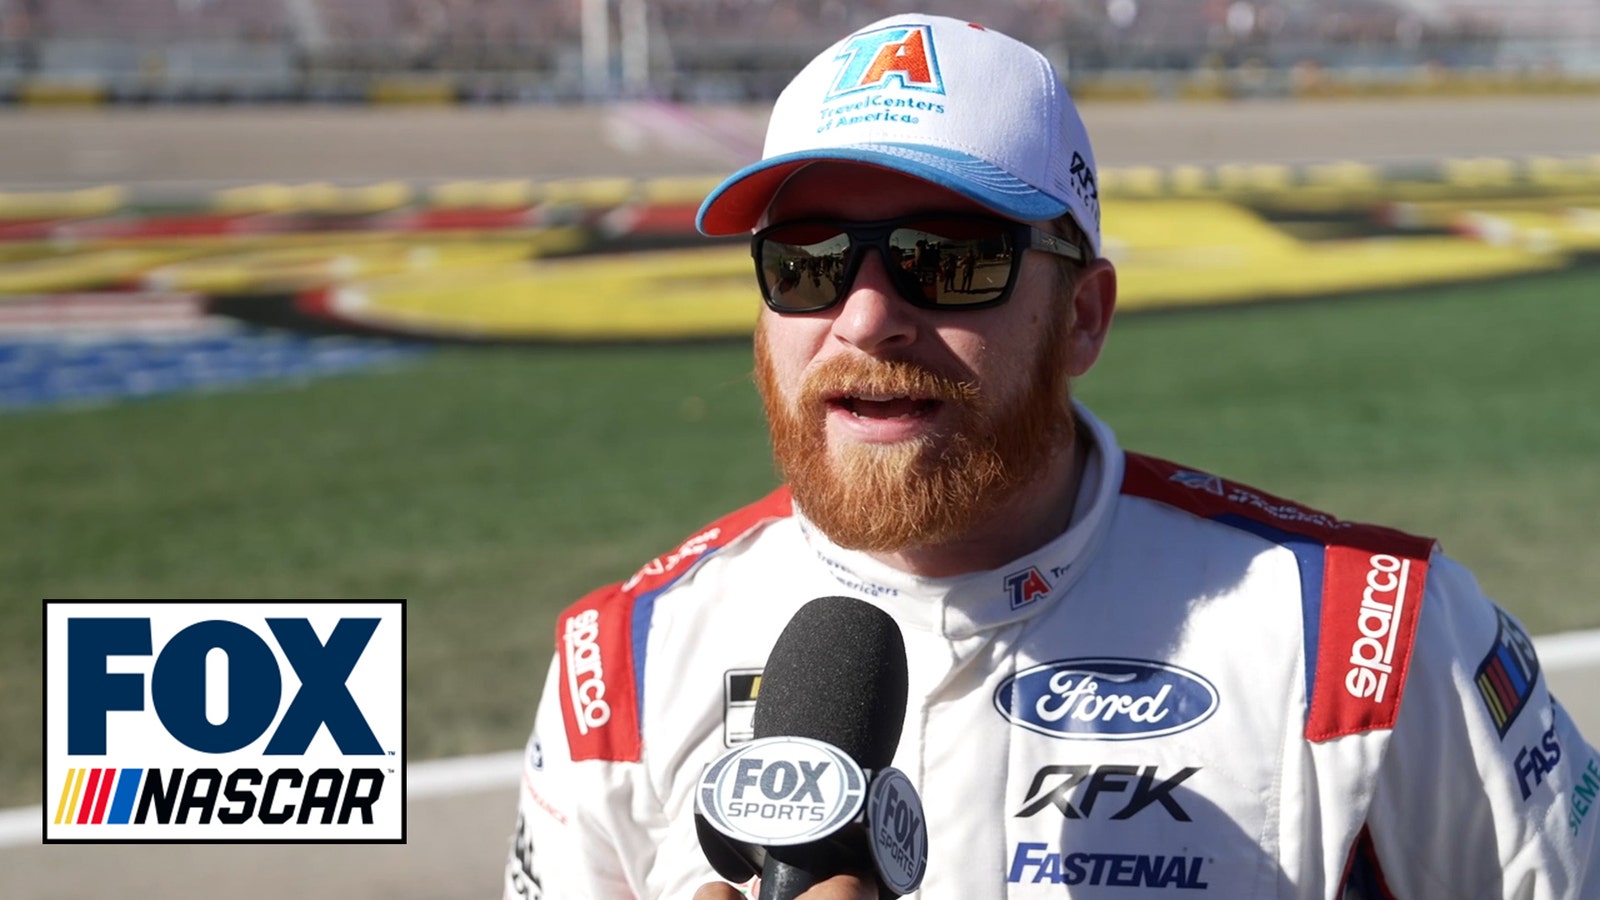 Chris Buescher discusses finishing 11th at Vegas and losing ground